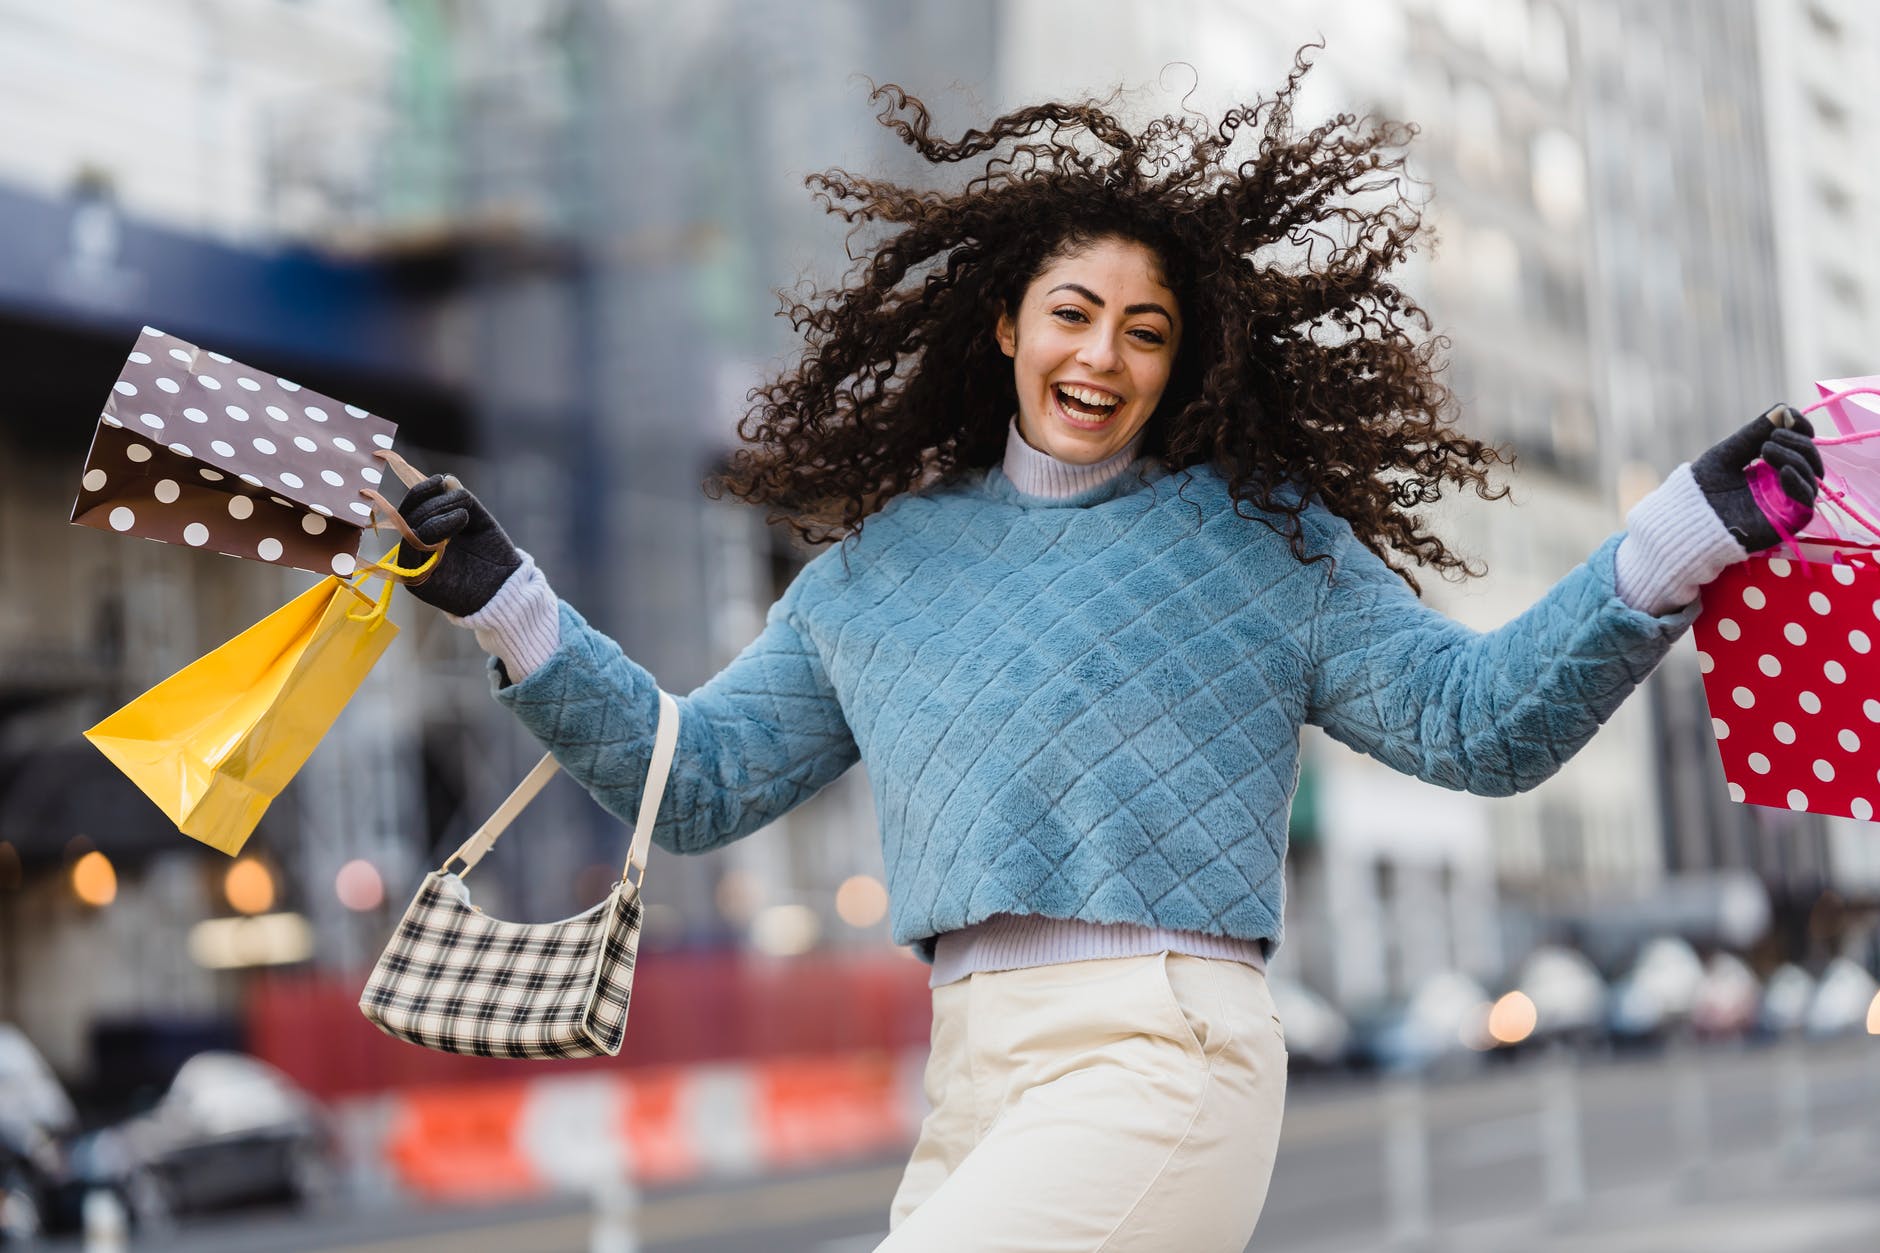 happy woman jumping with shopping bags - Should Sustainable Fashion Be Fun